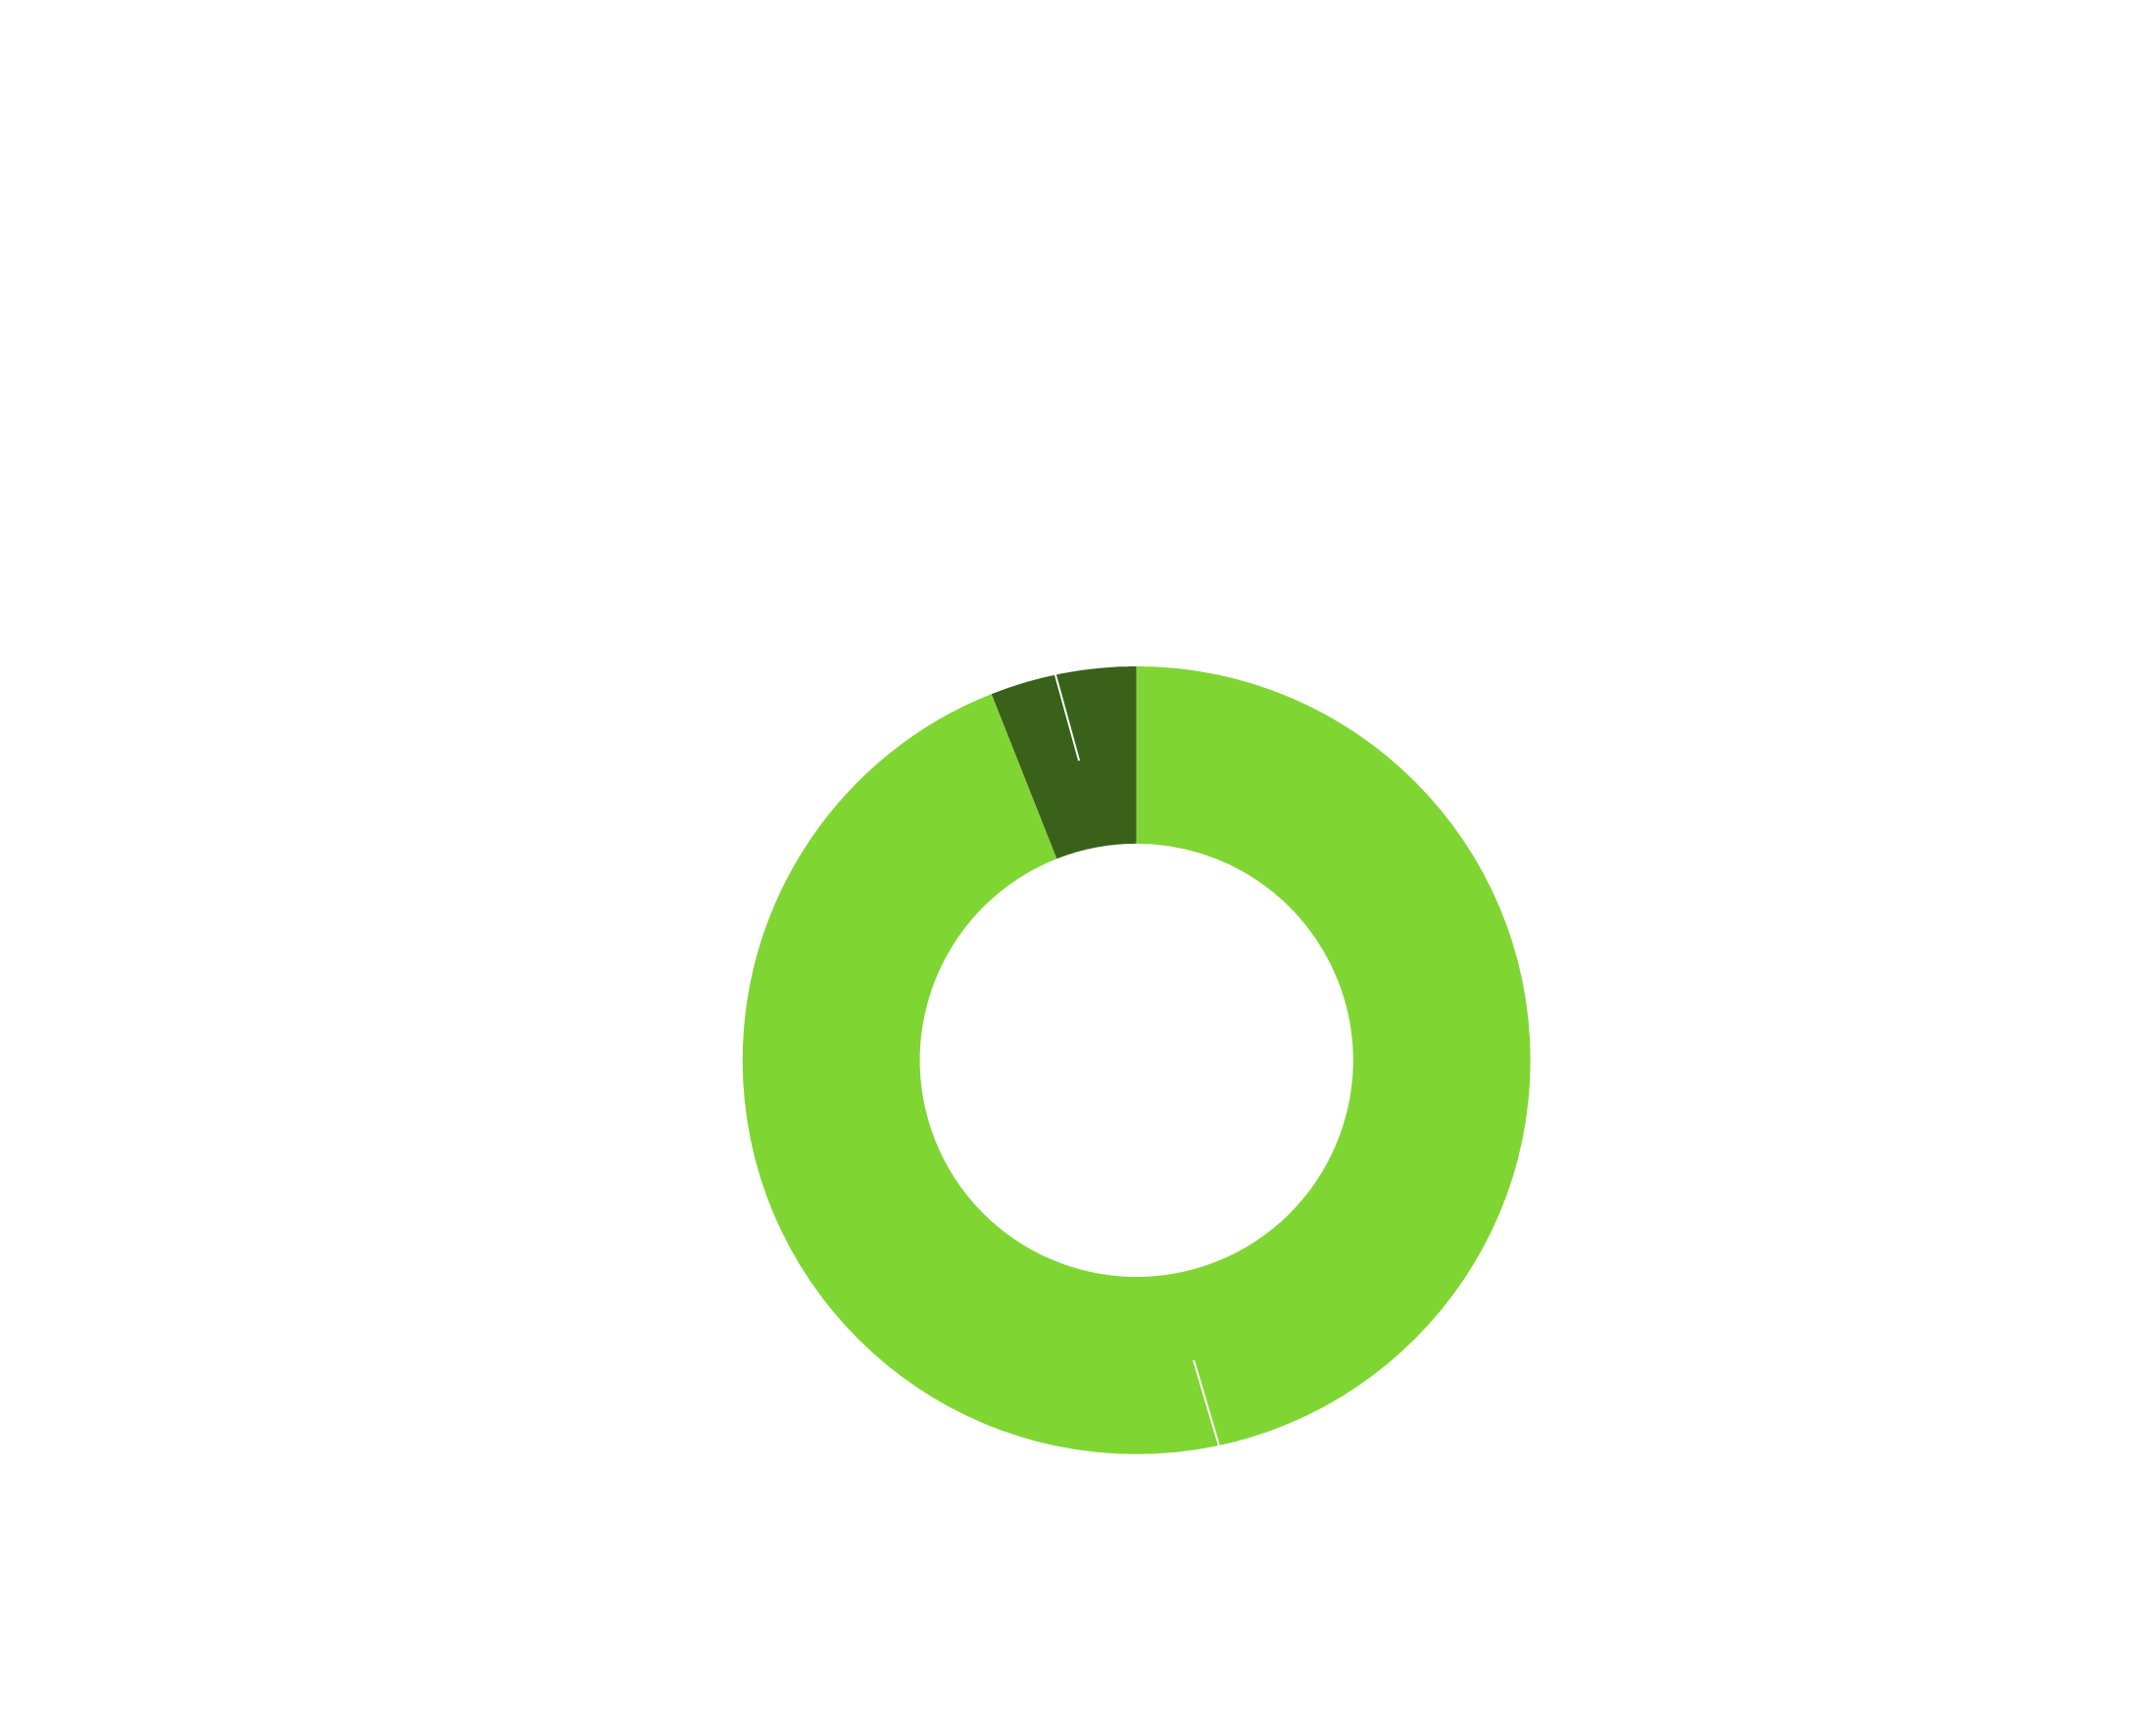 UDOT's Portion of the Federal Funds plus State Match is 94% from Federal Funds and 6% from State Match.